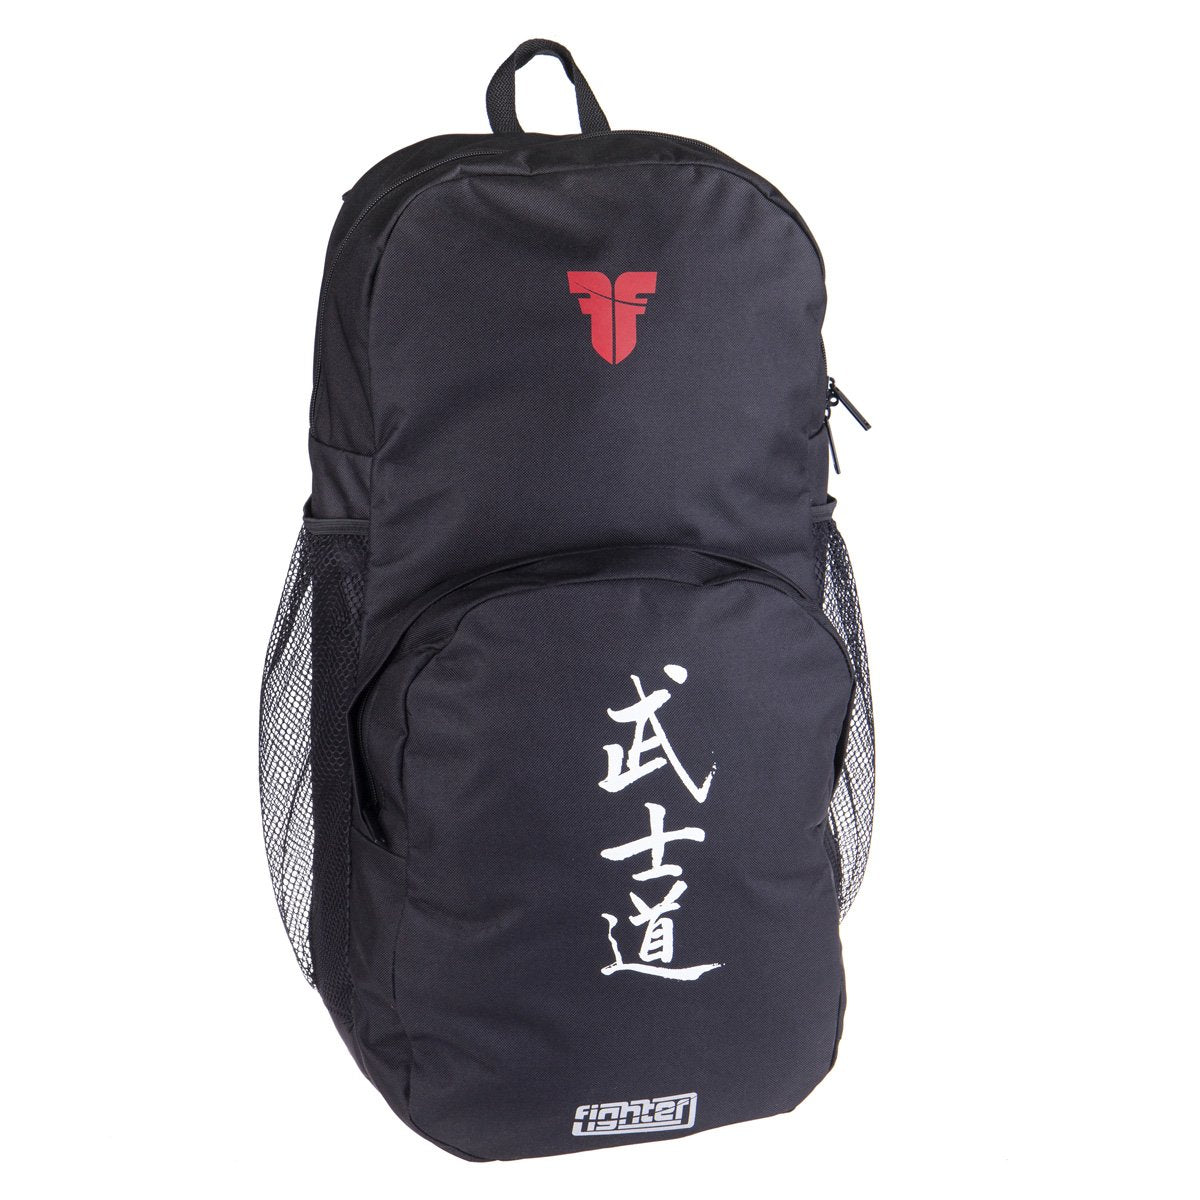 Fighters Large Backpack - Bushido